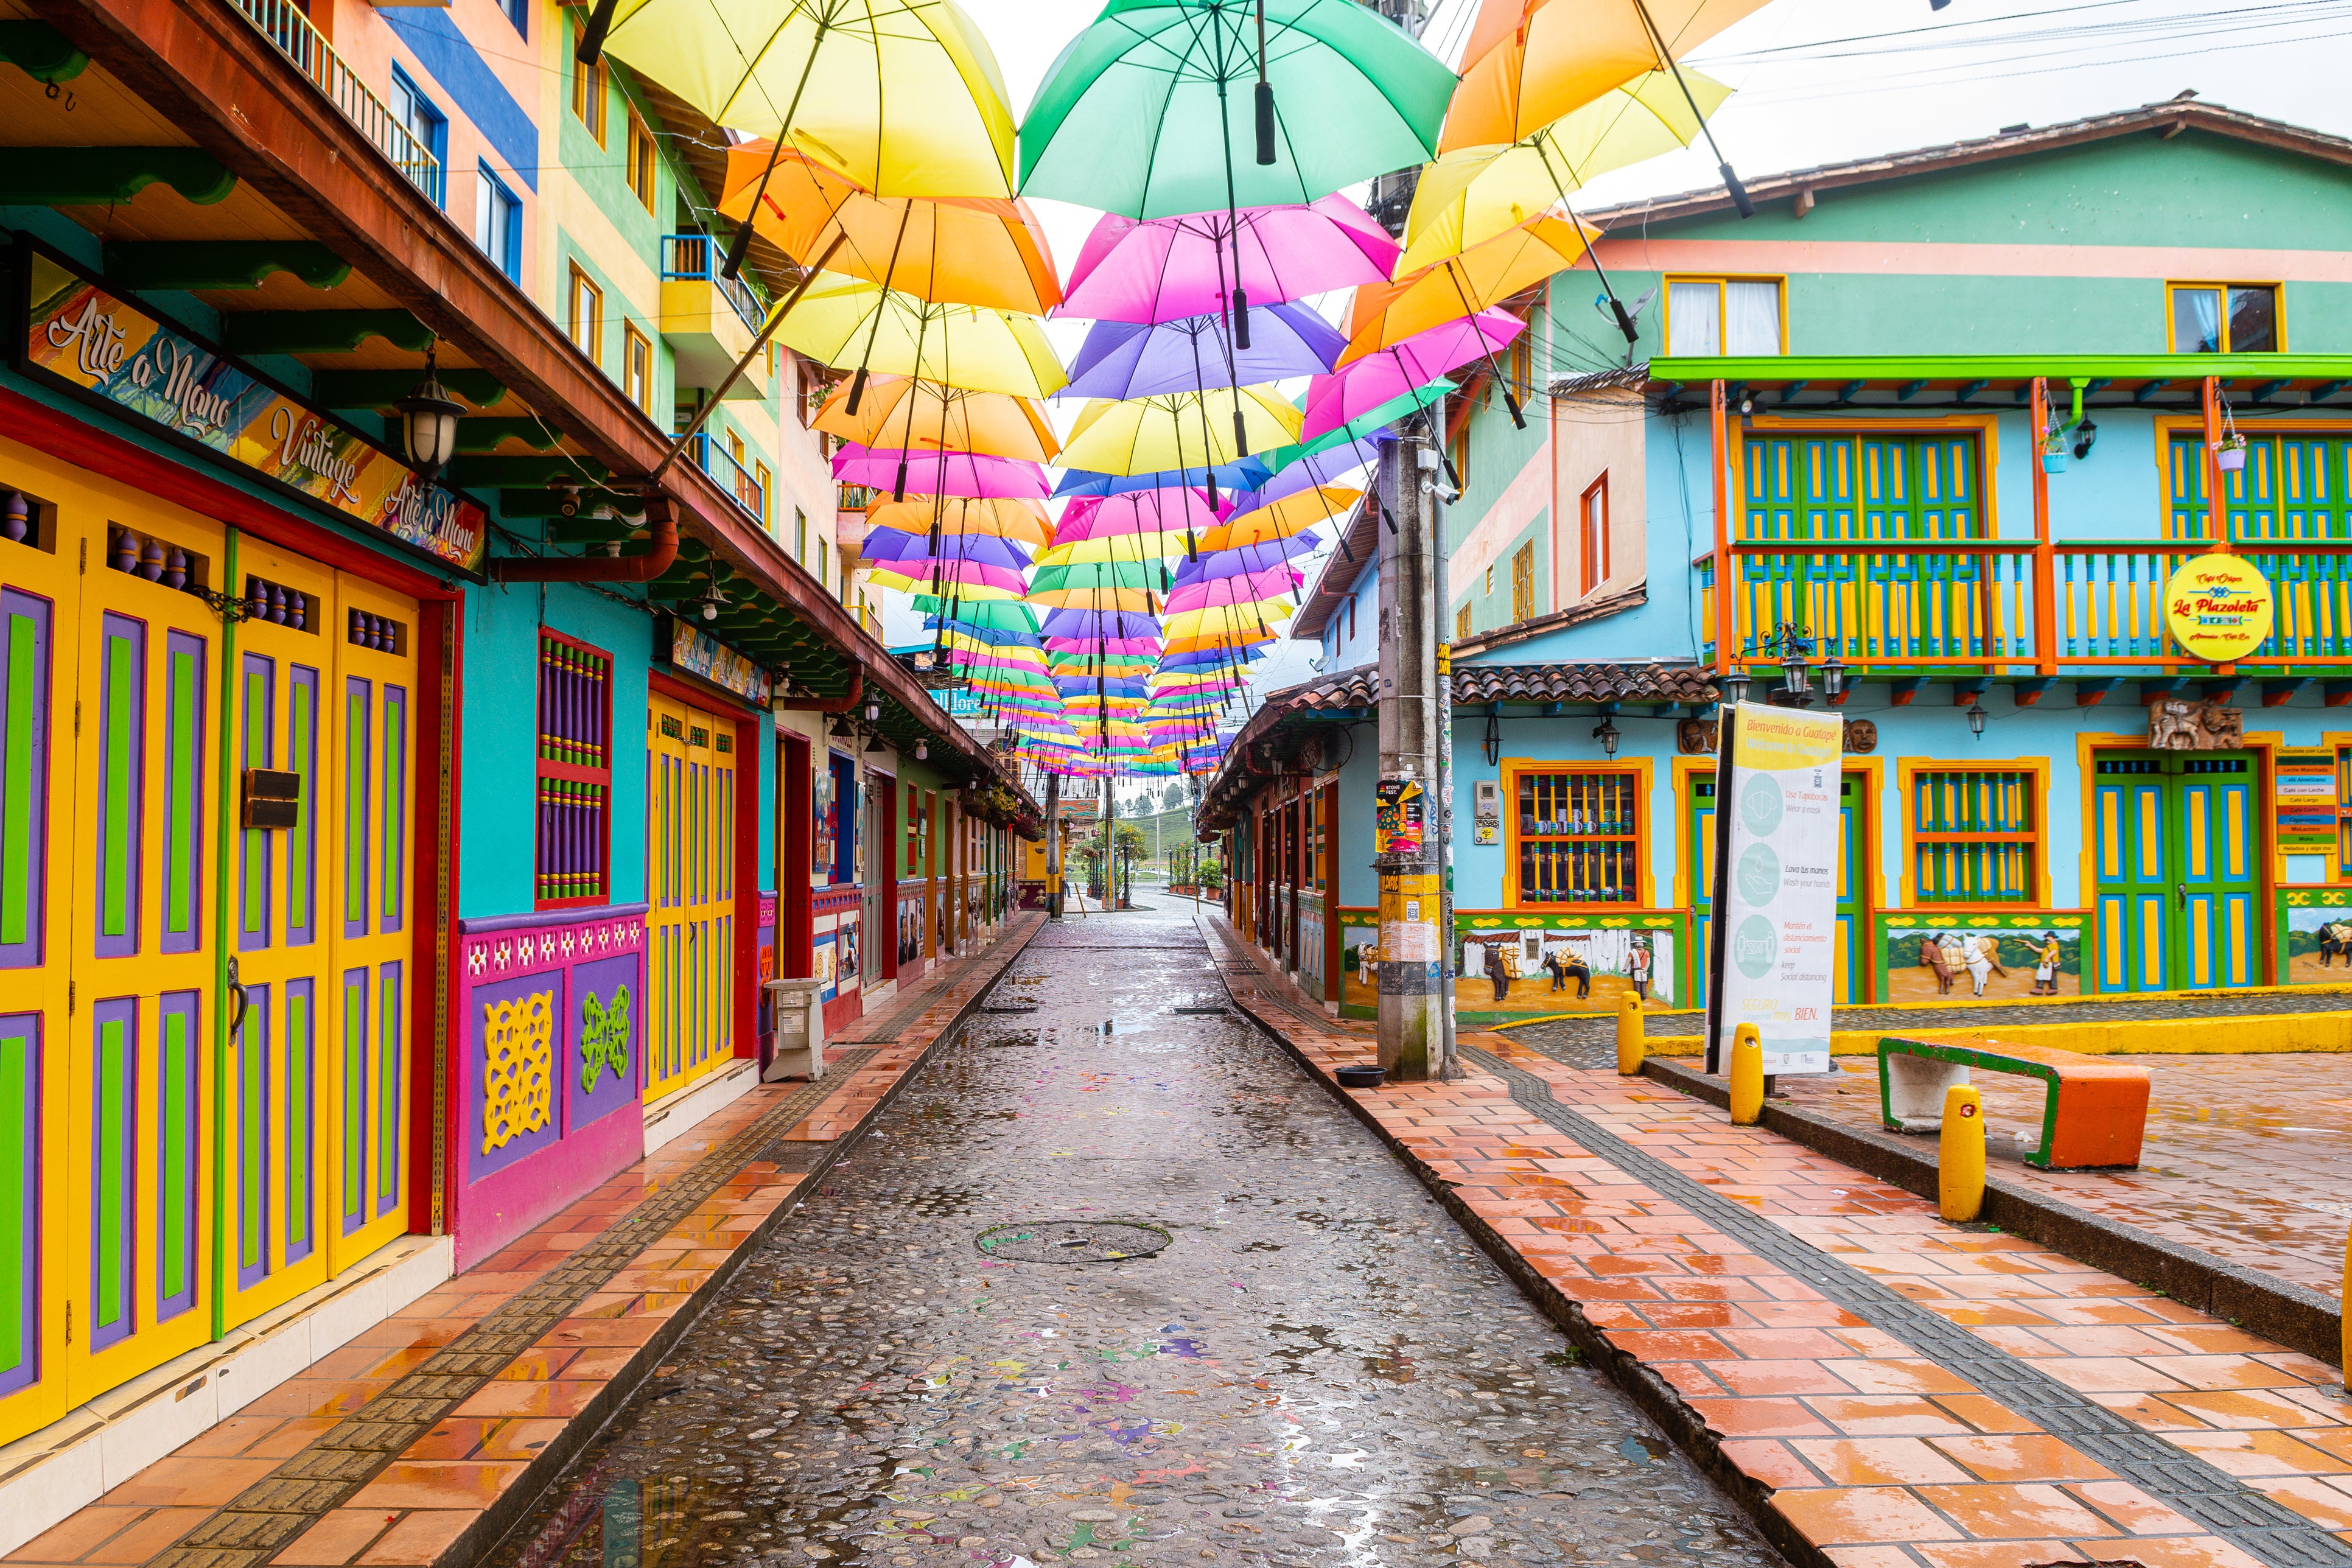 Peaked with El Peñol rock, Guatapé is Colombia’s most colourful pueblo